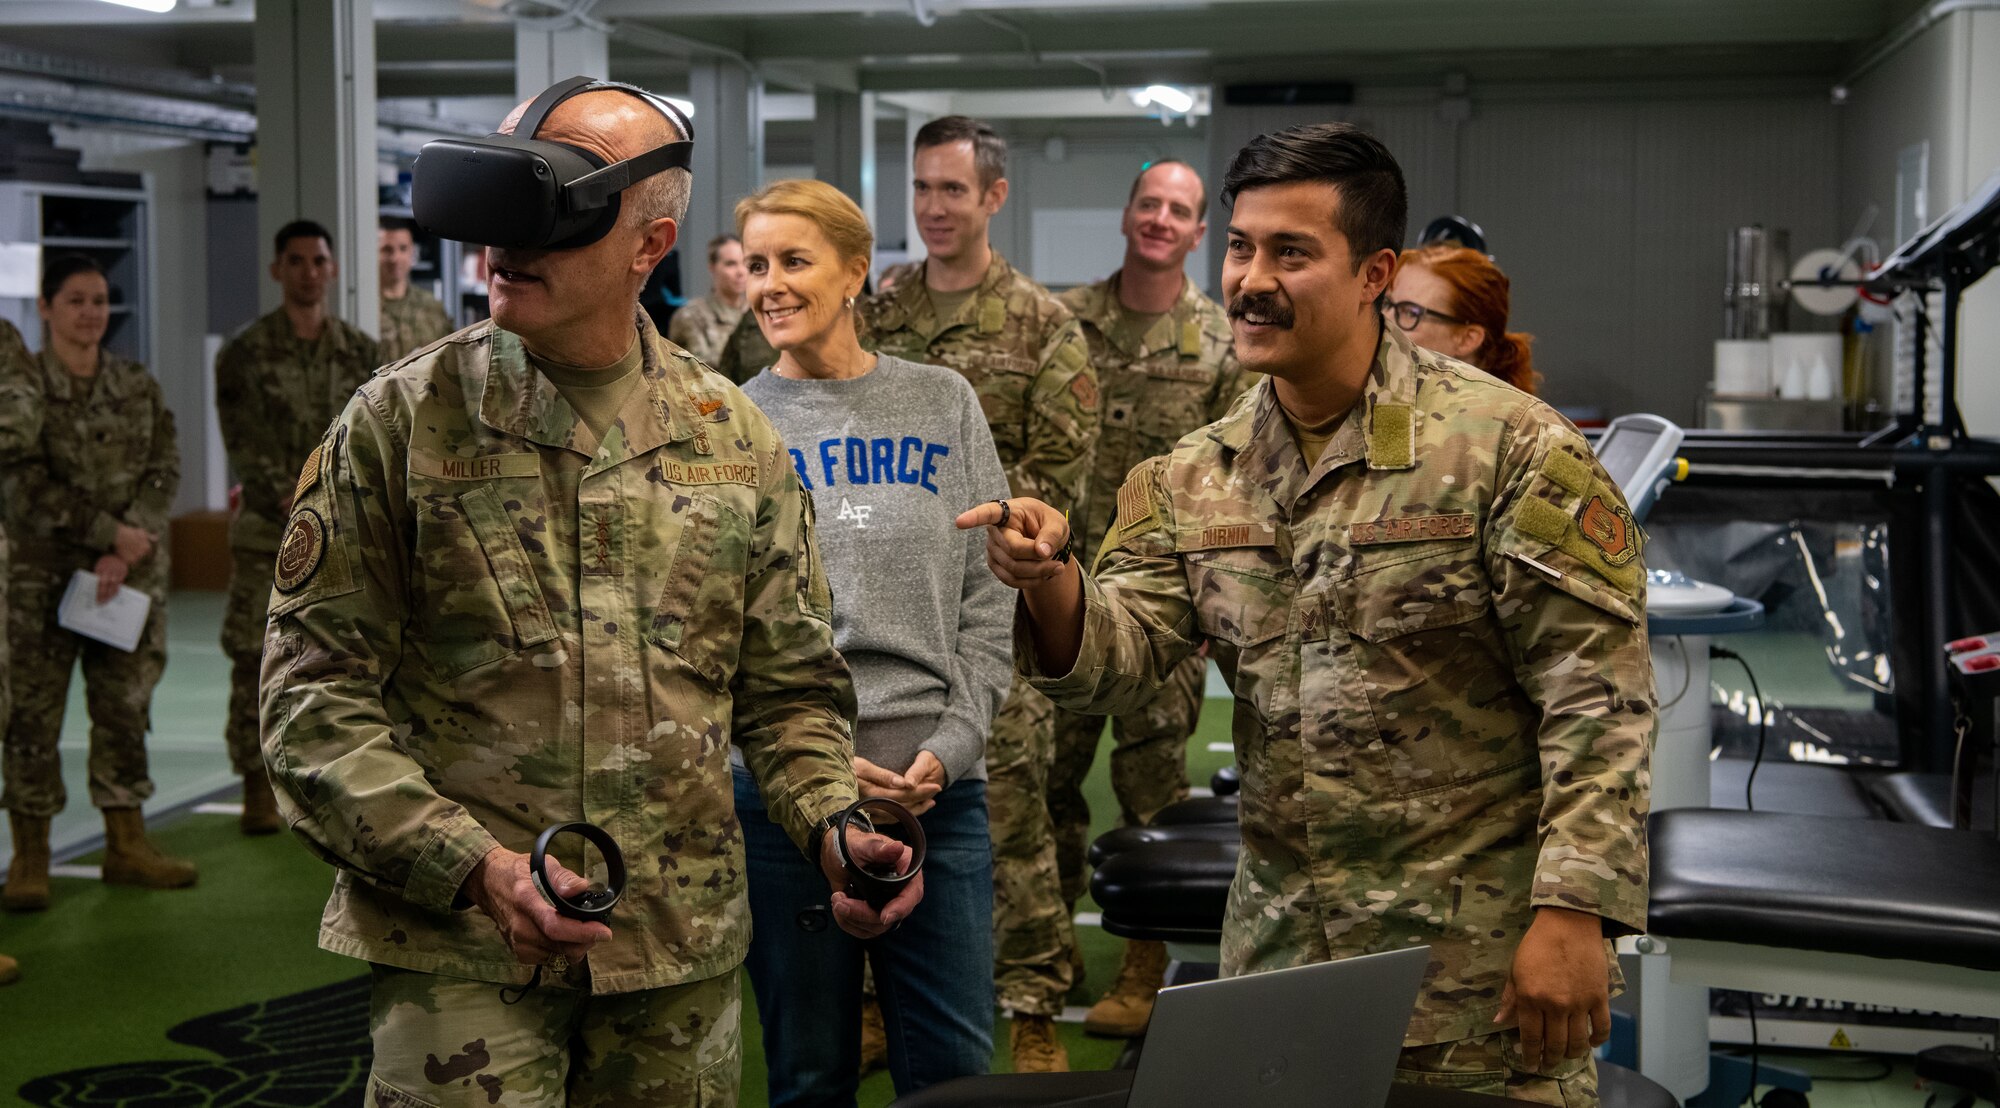 U.S. Air Force Lt. Gen. Robert Miller, Surgeon General of the Air Force, and Chief Master Sgt. Dawn Kolczynski, Medical Enlisted Force and Enlisted Corps Chief, visit the 56th Rescue Squadron (RQS) at Aviano Air Base, Italy, Nov. 9, 2022. The 56th RQS incorporates virtual reality into their pararescuemen’s training to present them with unique obstacles they must find solutions to all while in the squadron. (U.S. Air Force photo by Airman 1st Class Thomas Calopedis)